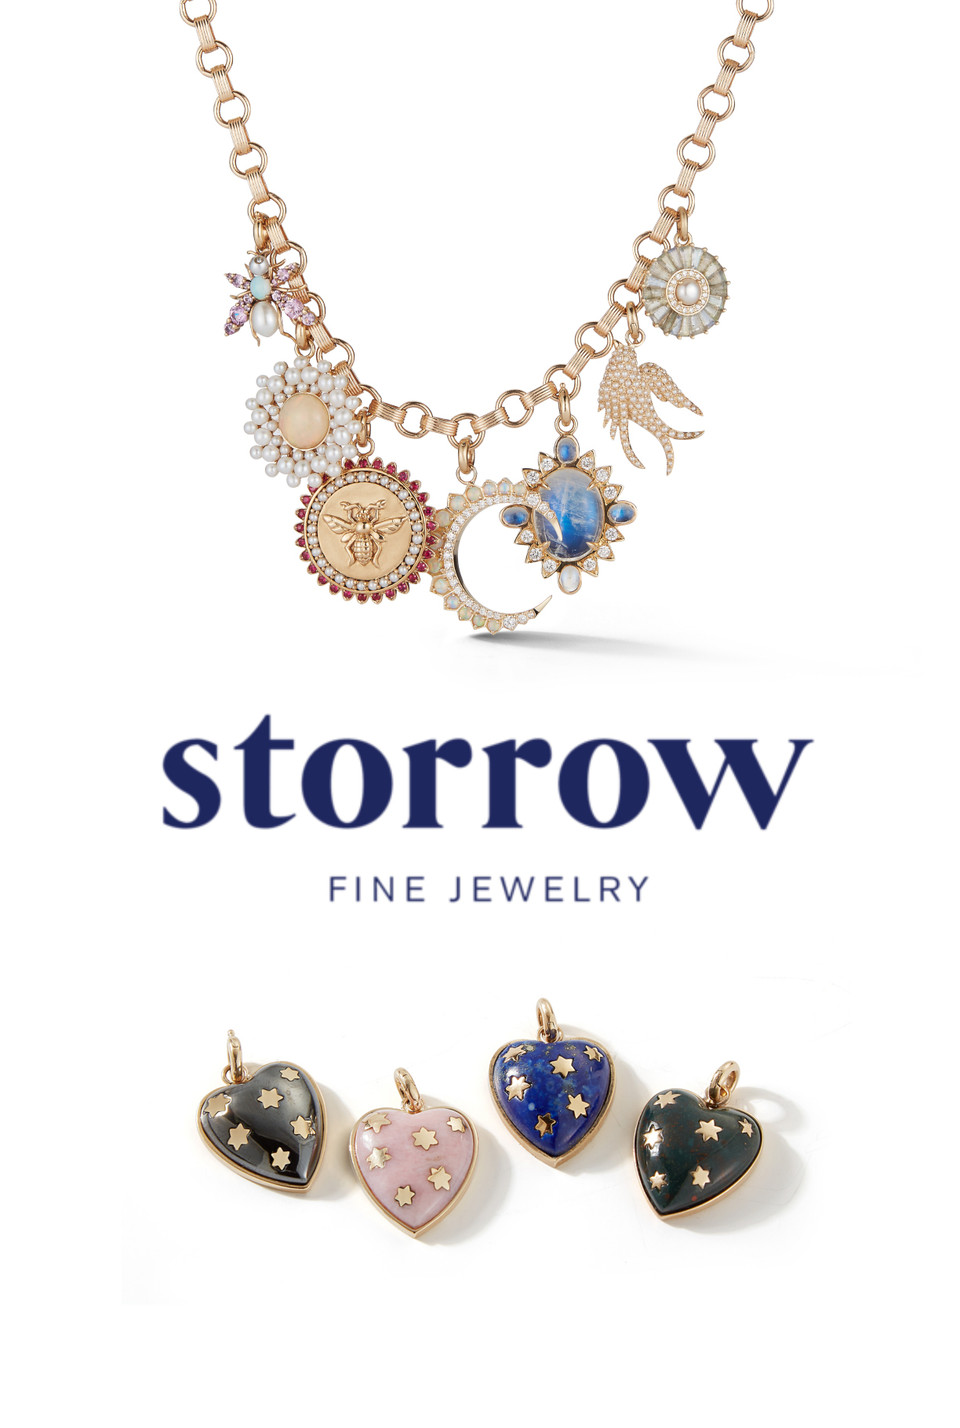 Welcome to the family - storrow jewelry